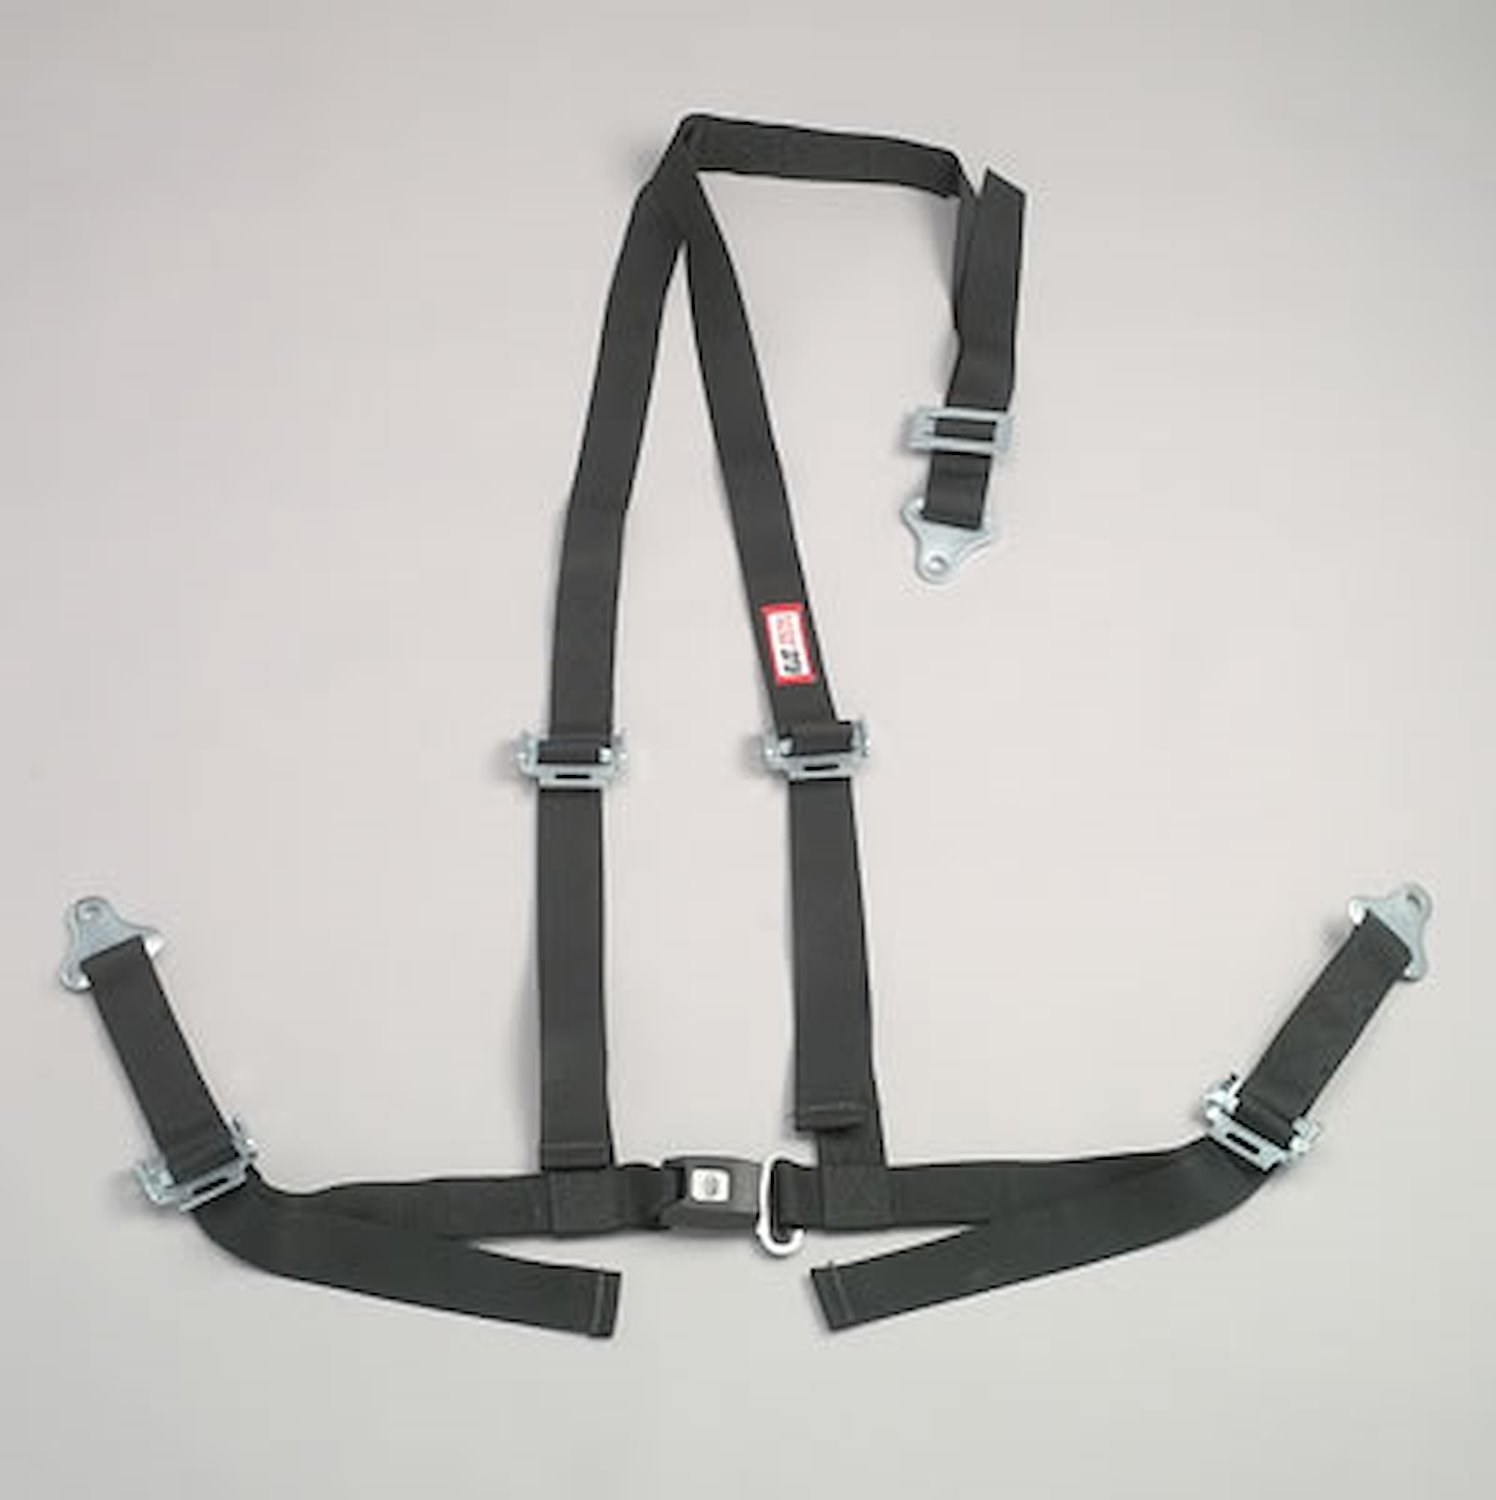 NON-SFI B&T HARNESS 2 PULL DOWN Lap Belt SNAP 2 S. H. Individual ROLL BAR Mount WRAP/BOLT YELLOW